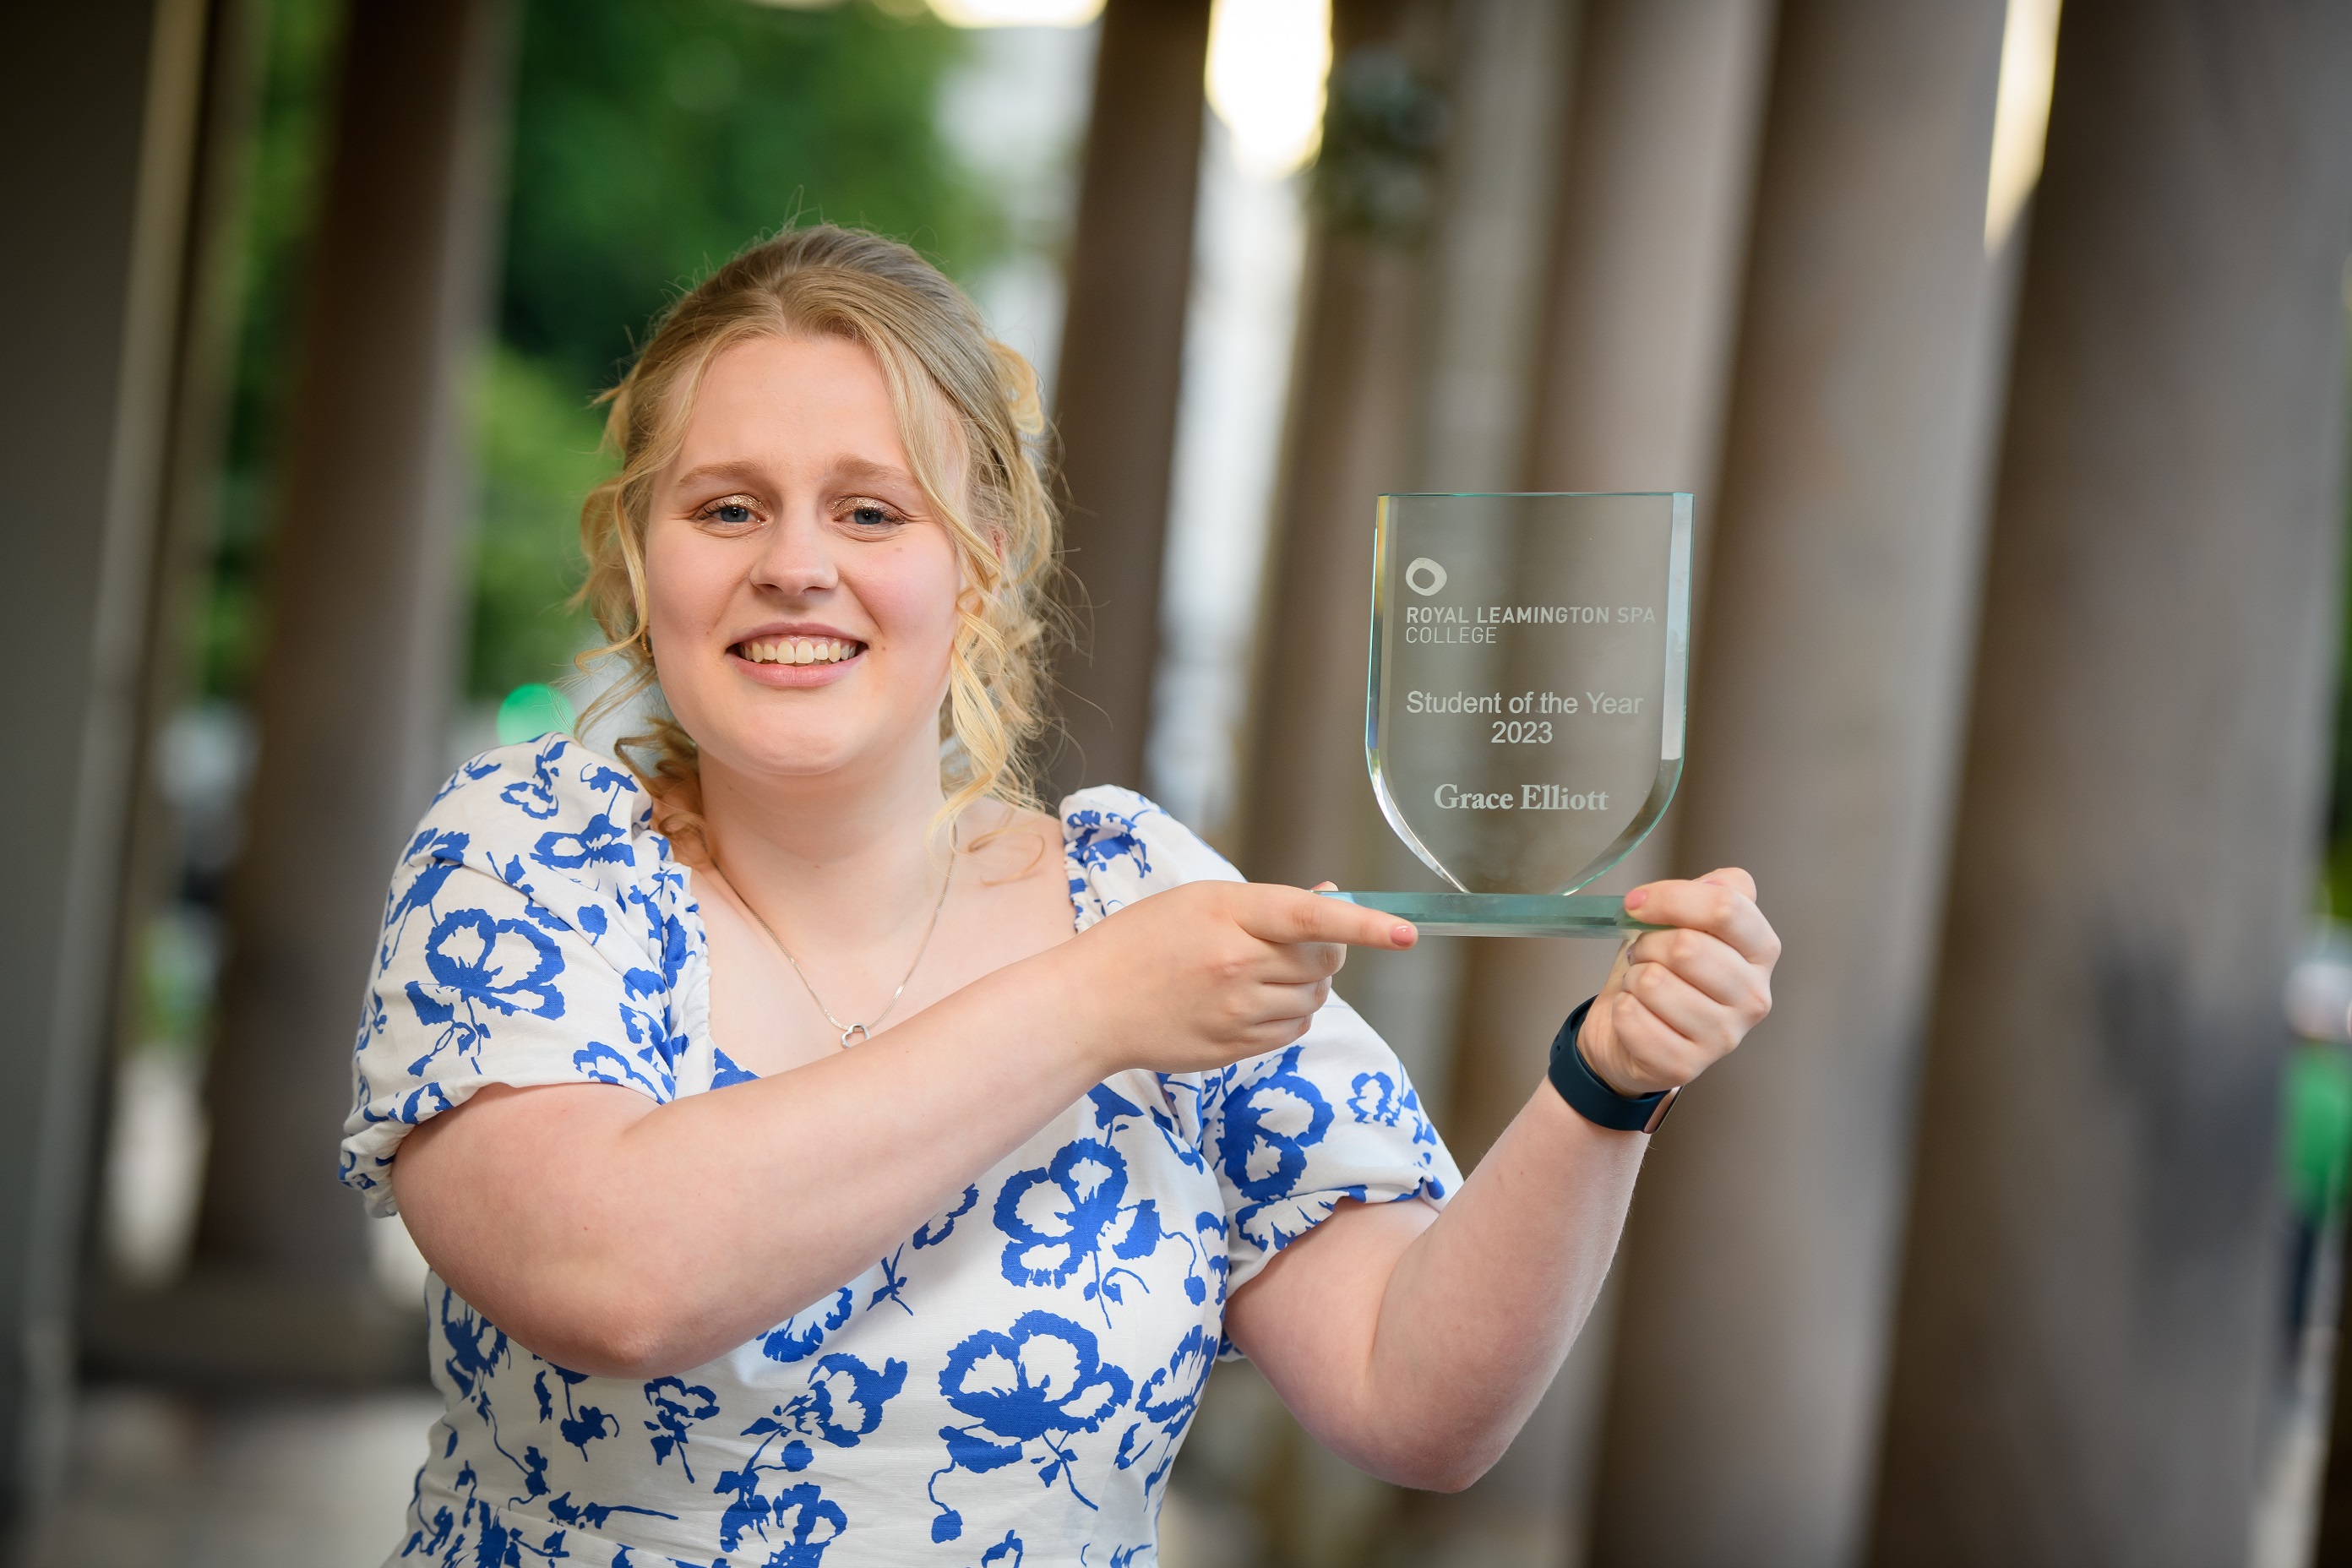 Leamington Early Years student who helped transform college nursery wins top prize